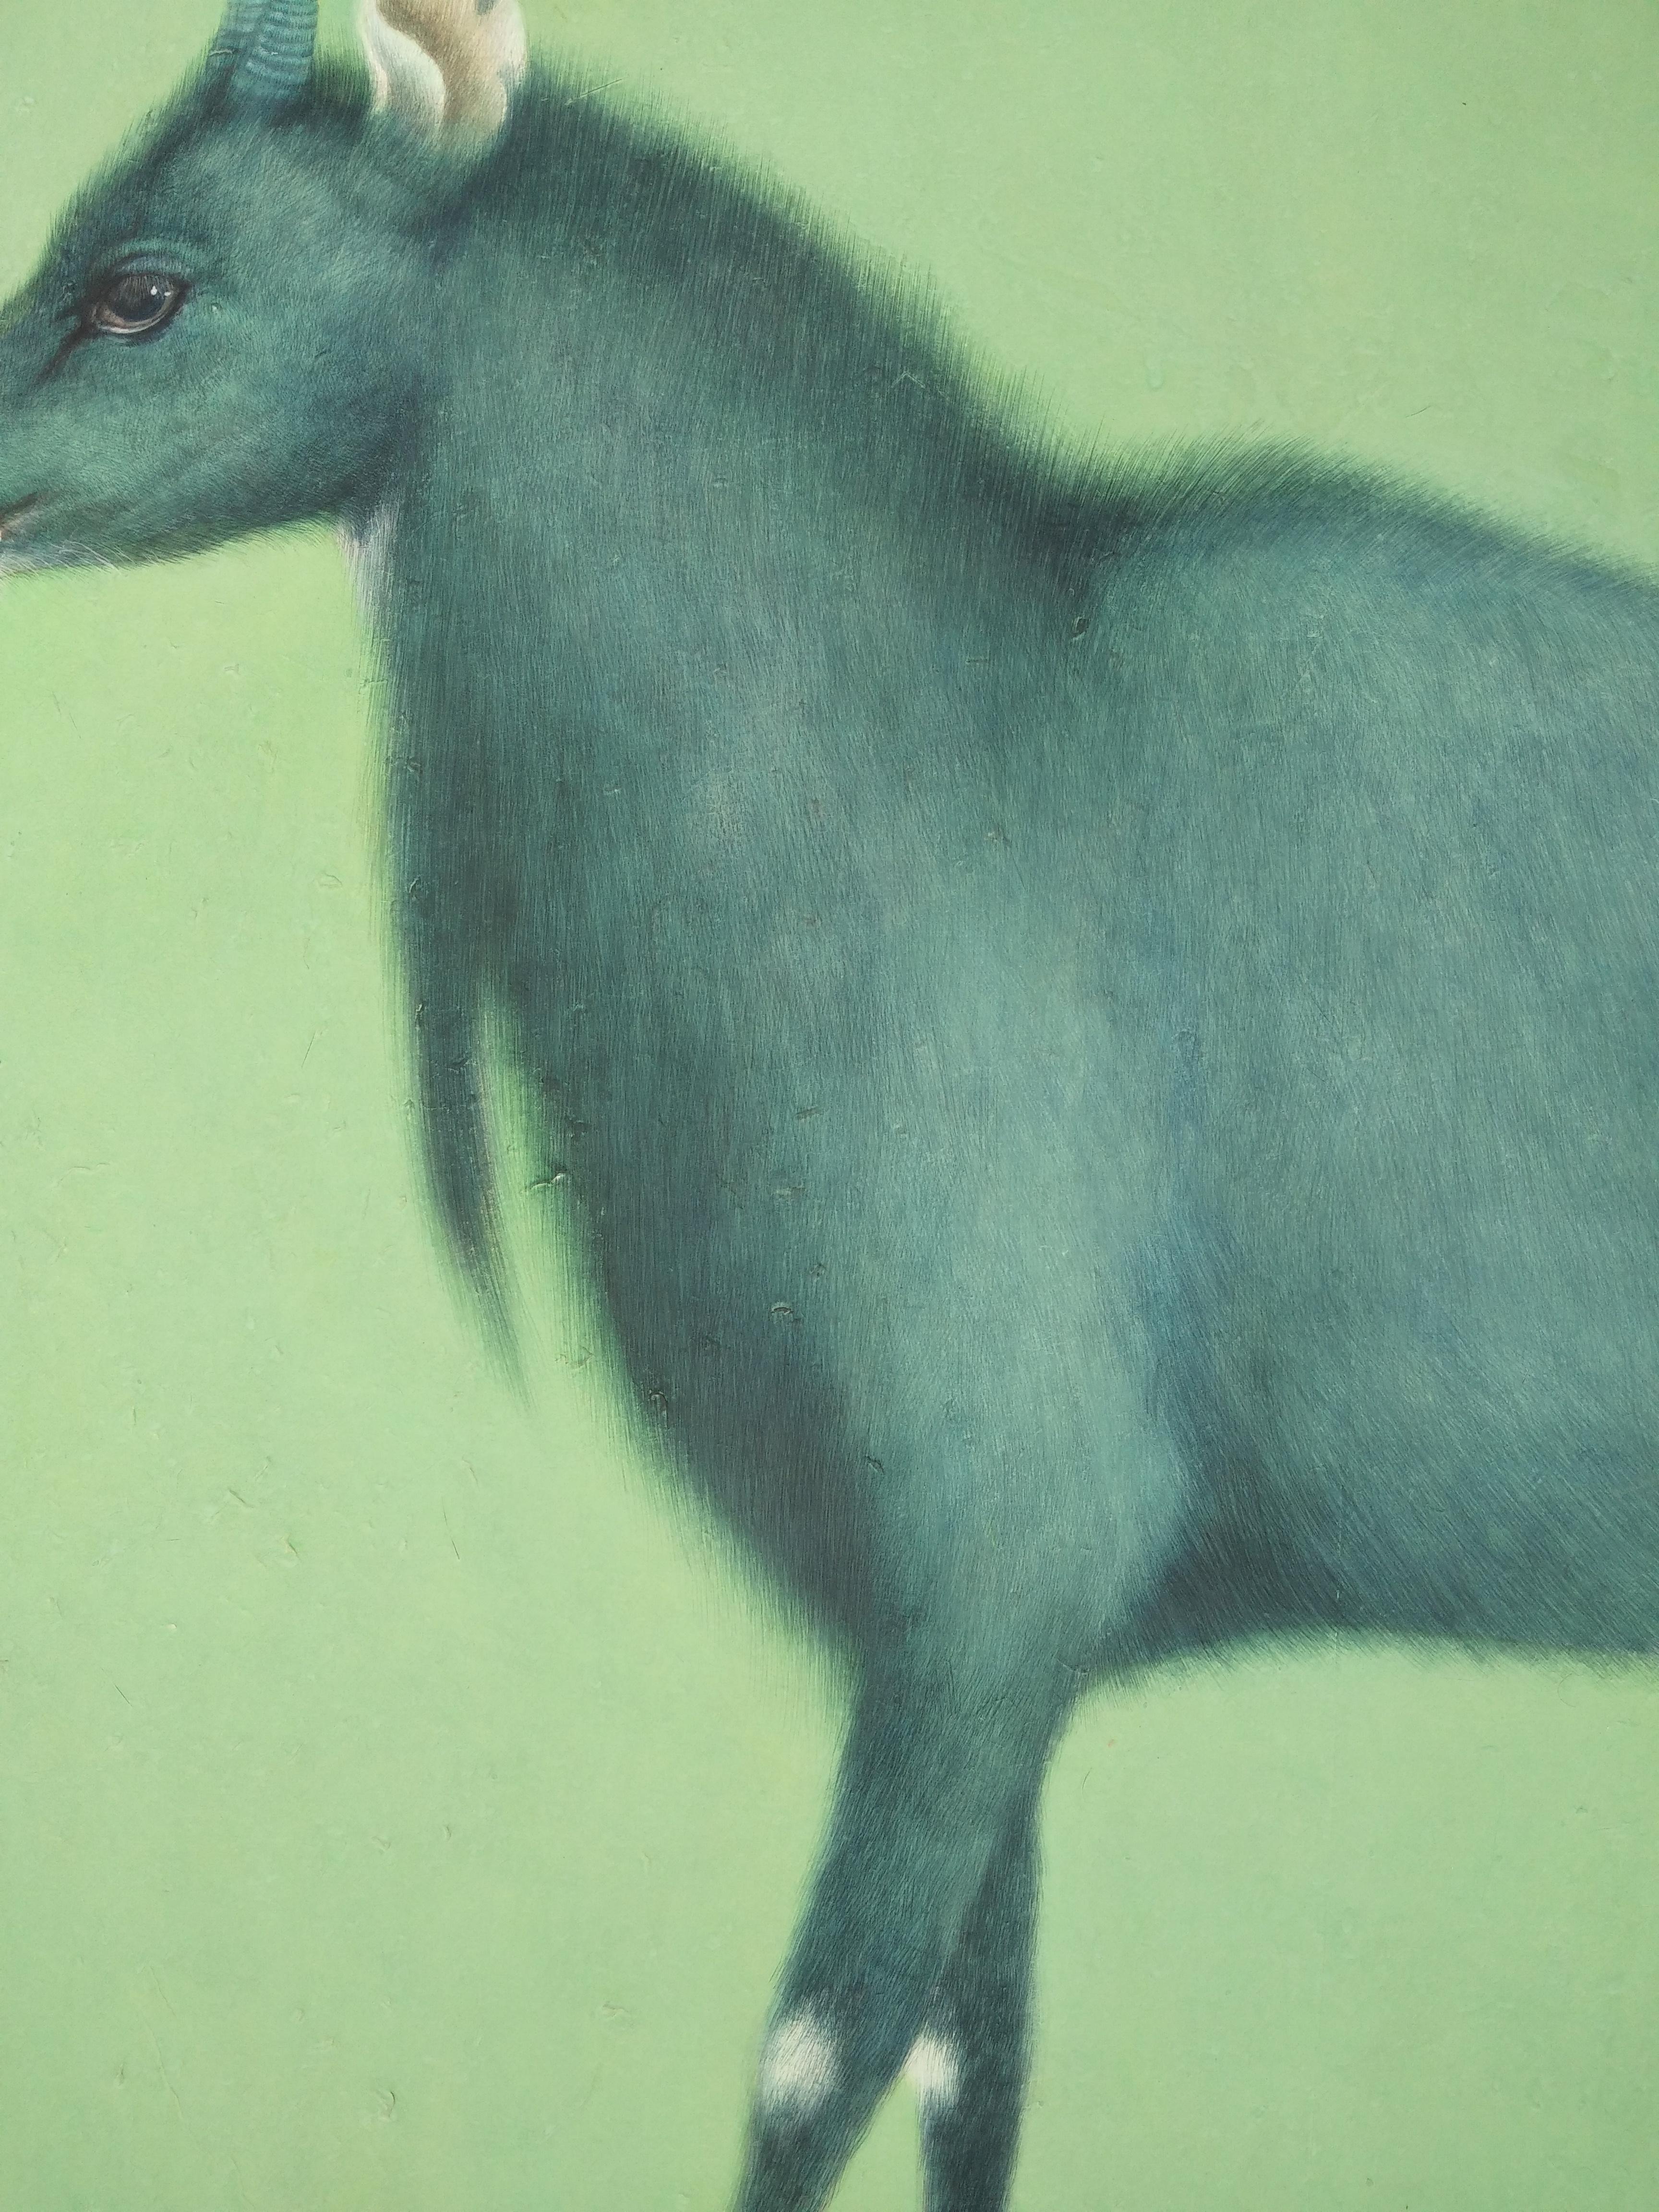 Suffocated Life #2 - Green Animal Painting by Tapas Das